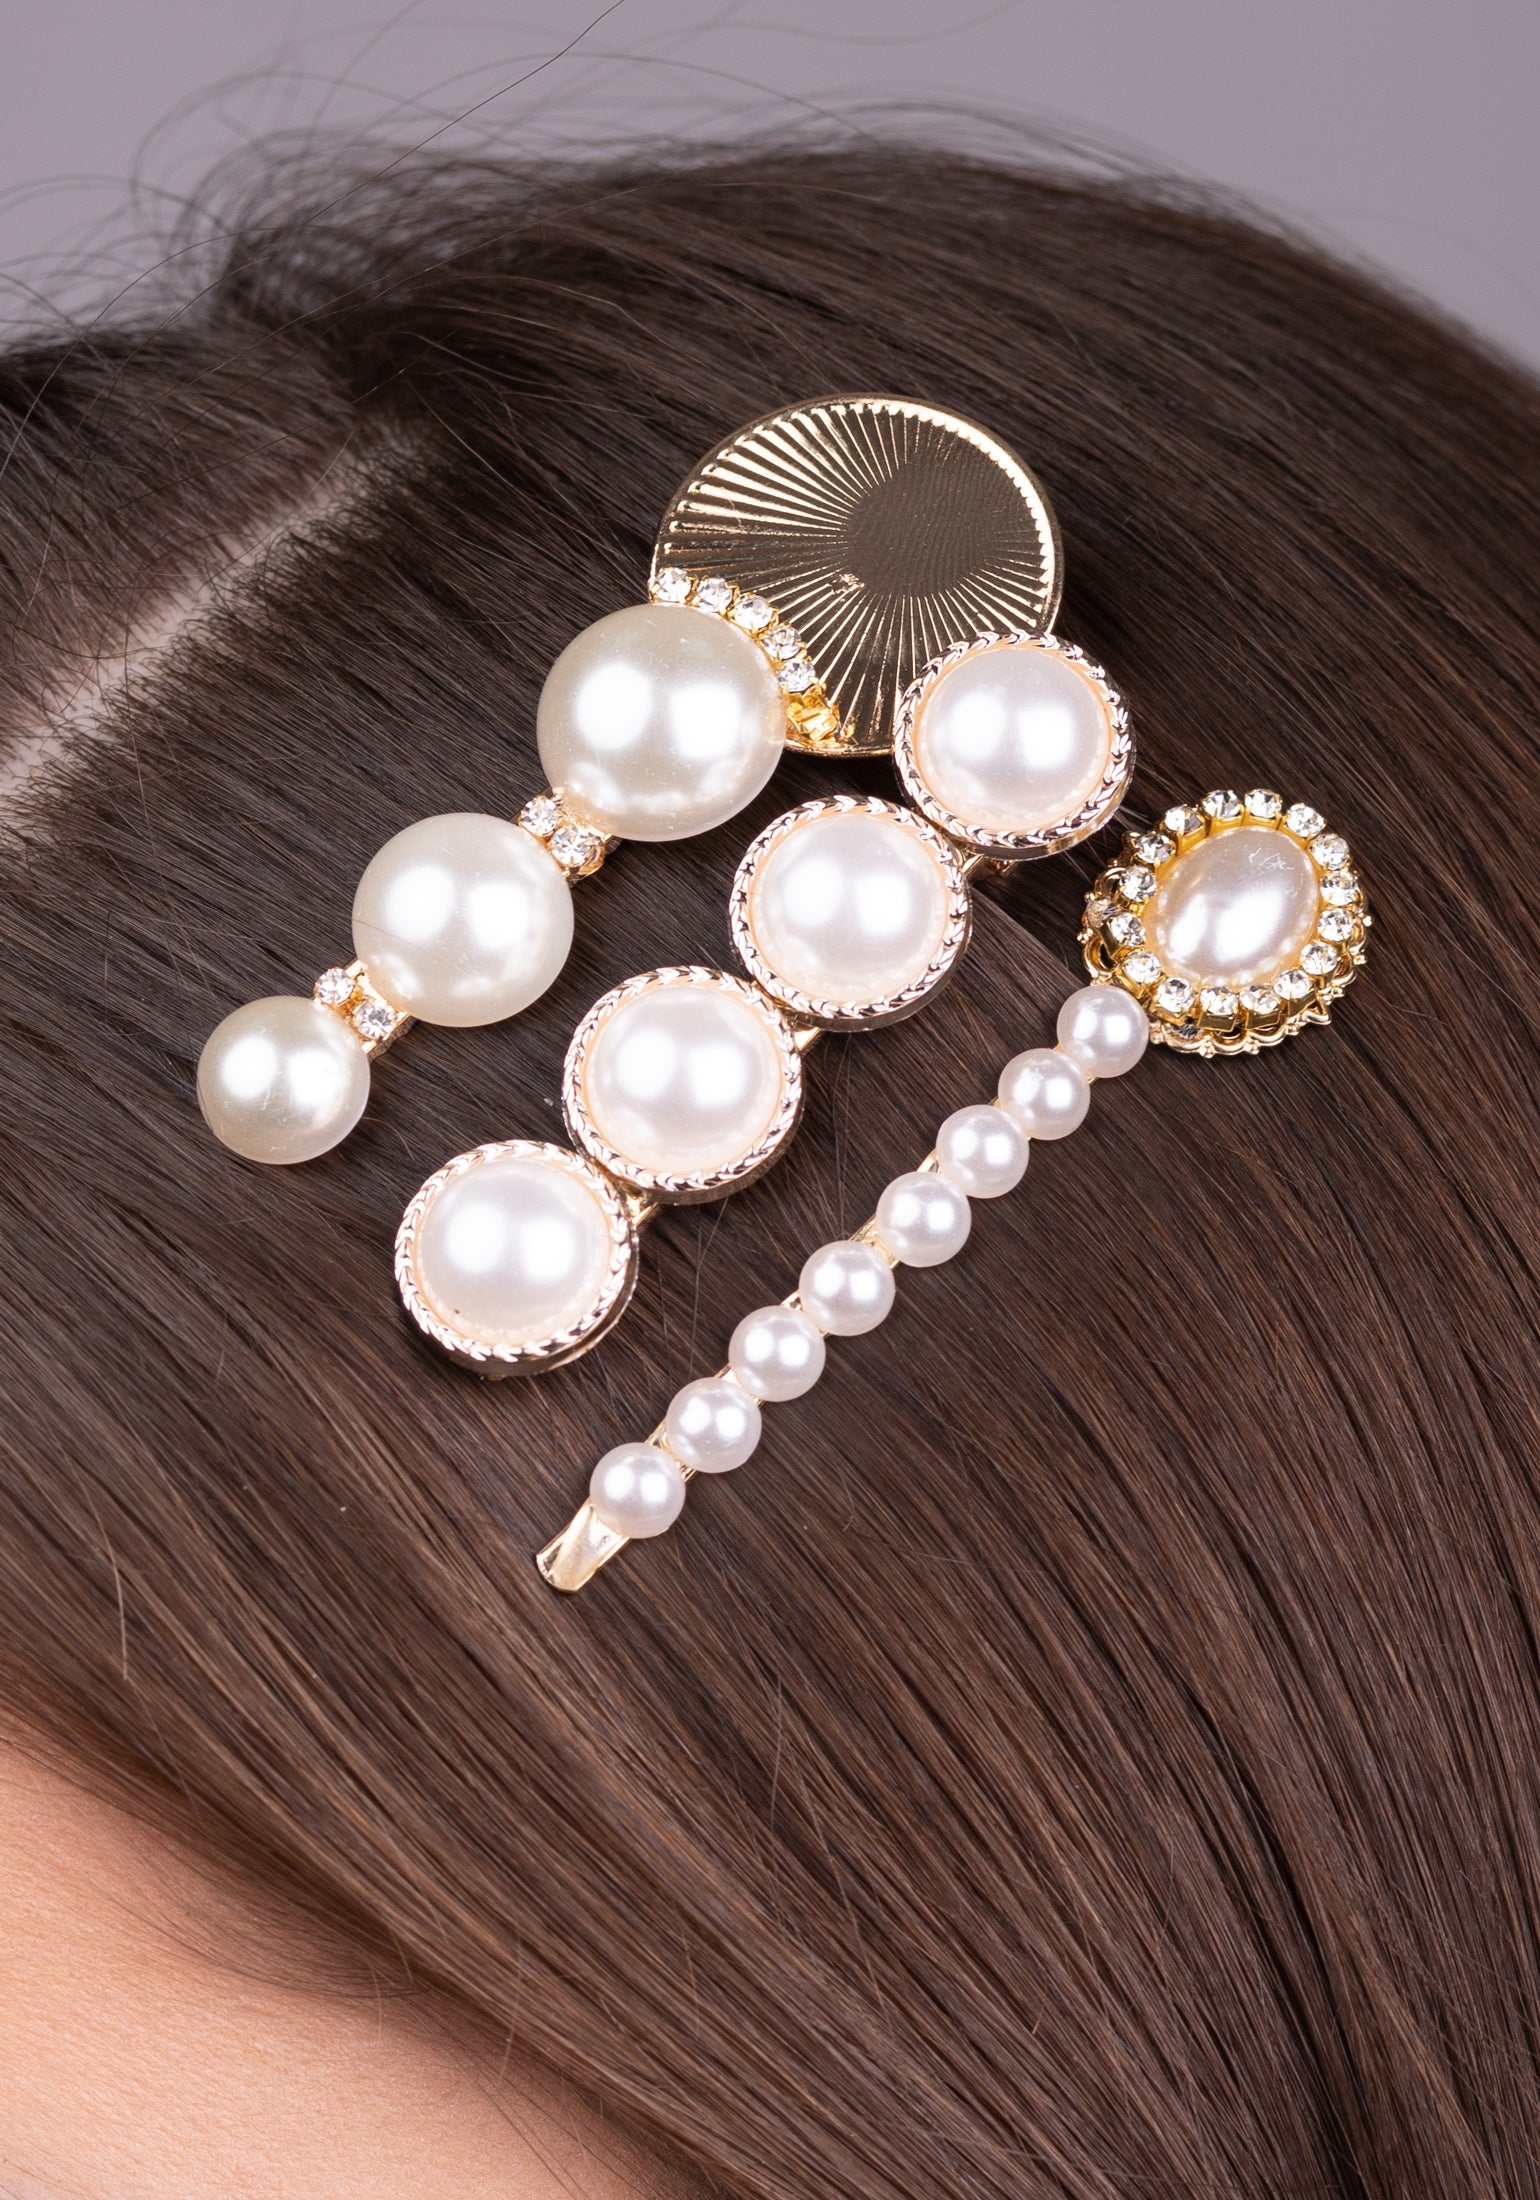 Hair clips- The best hair trend for this season!